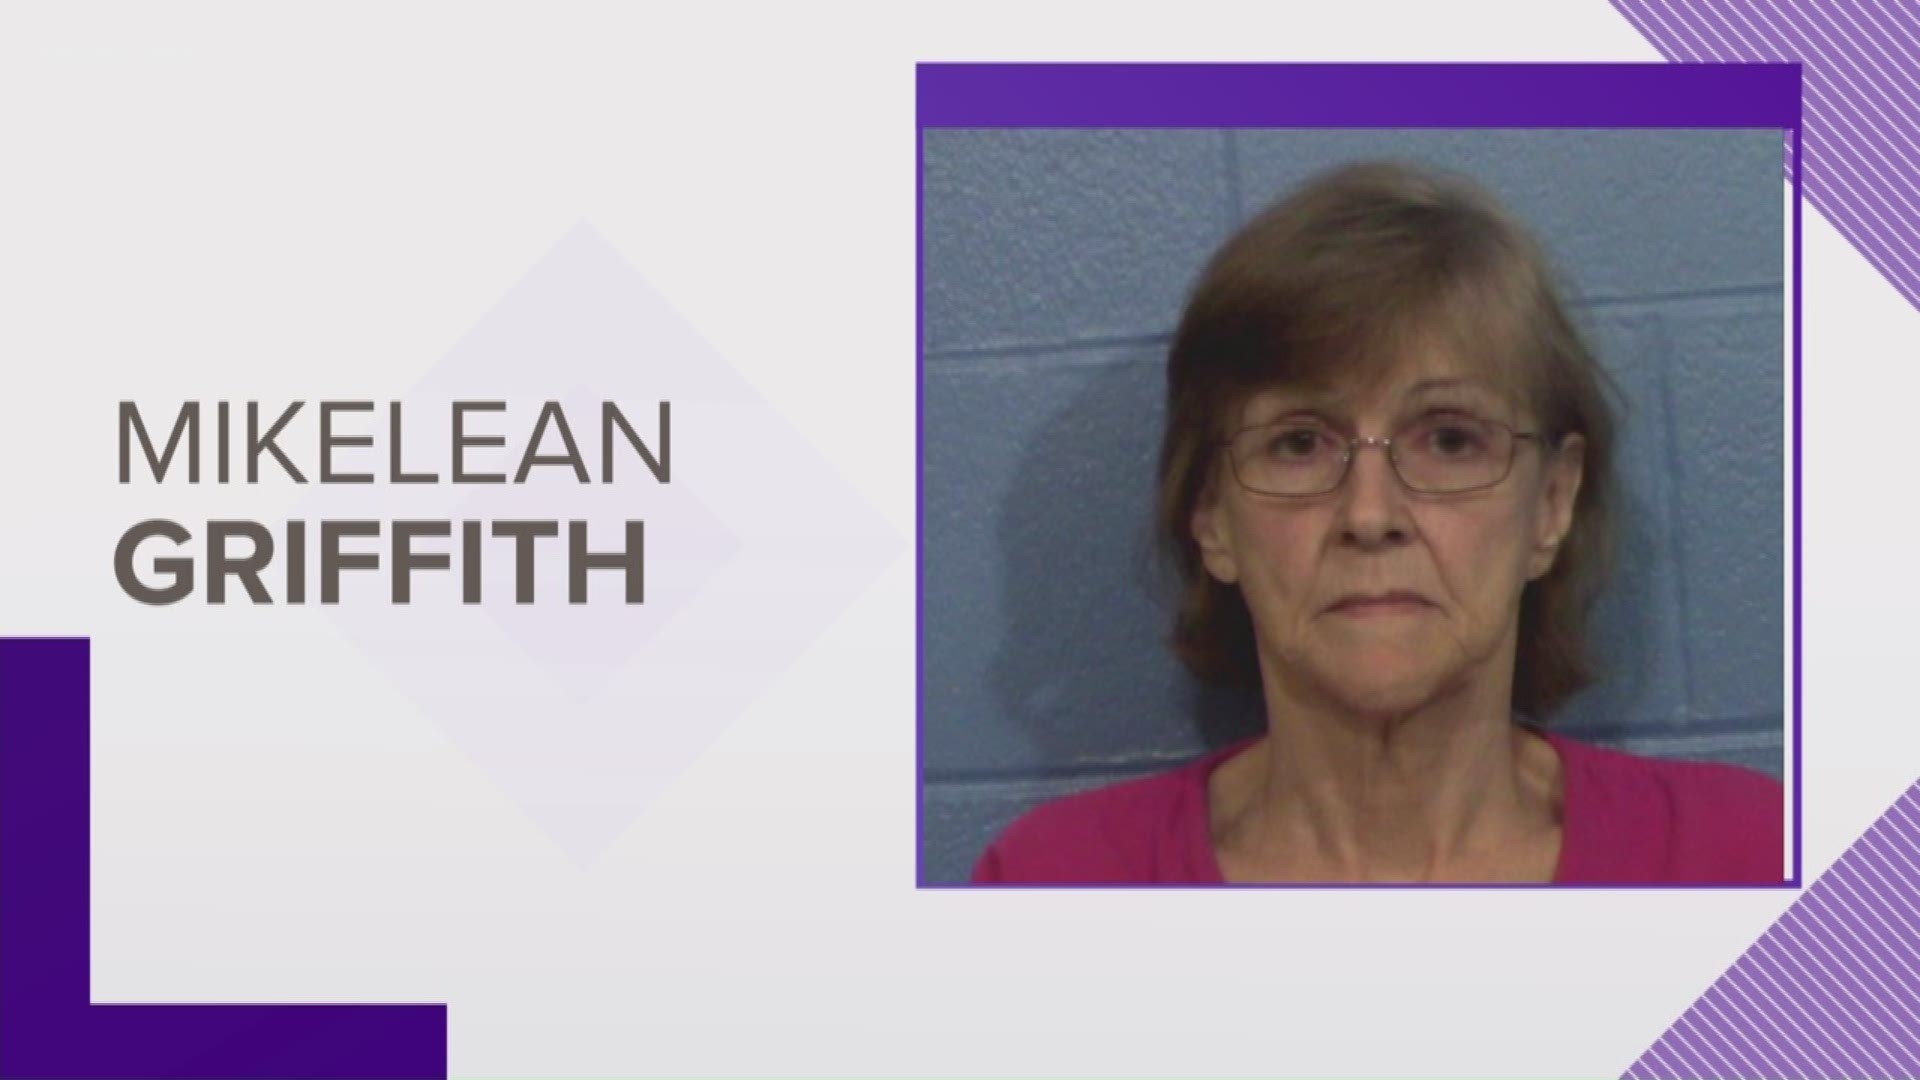 Mikelean Griffith, 67, reportedly pinned a two-year-old to a mat with her knee on the child's back because he refused to take a nap.